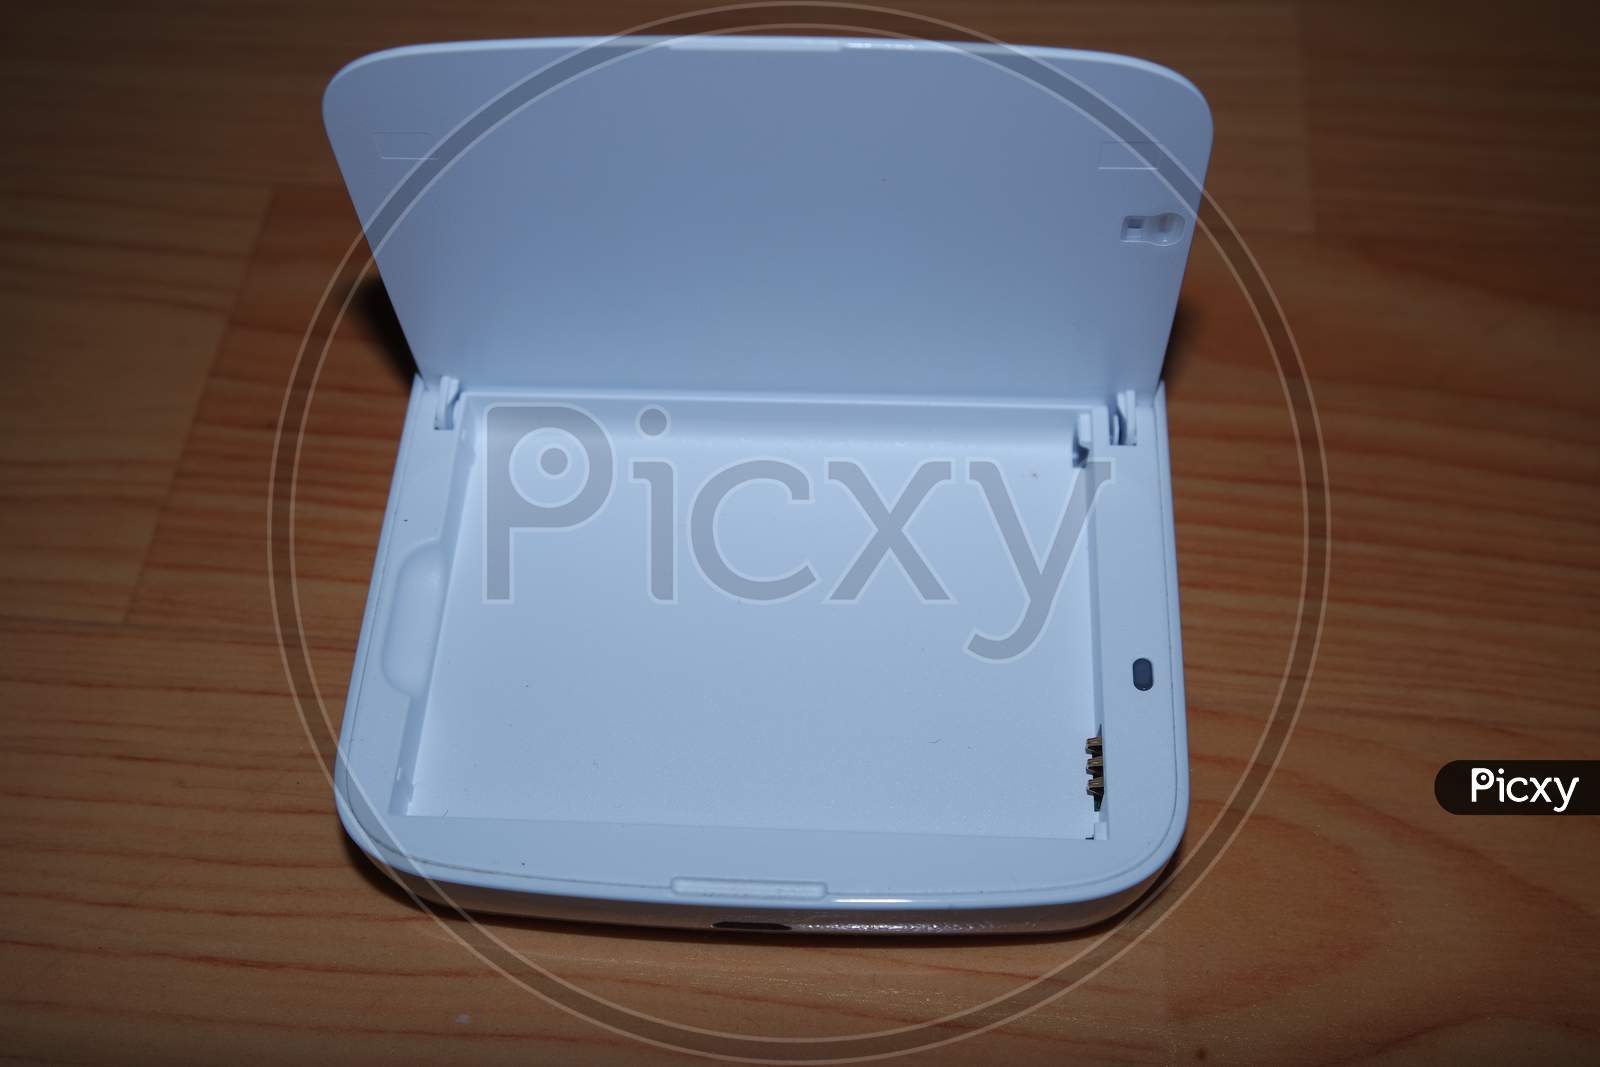 White Colored Battery Charging Box For Electronic Devices Like Mobile Phone